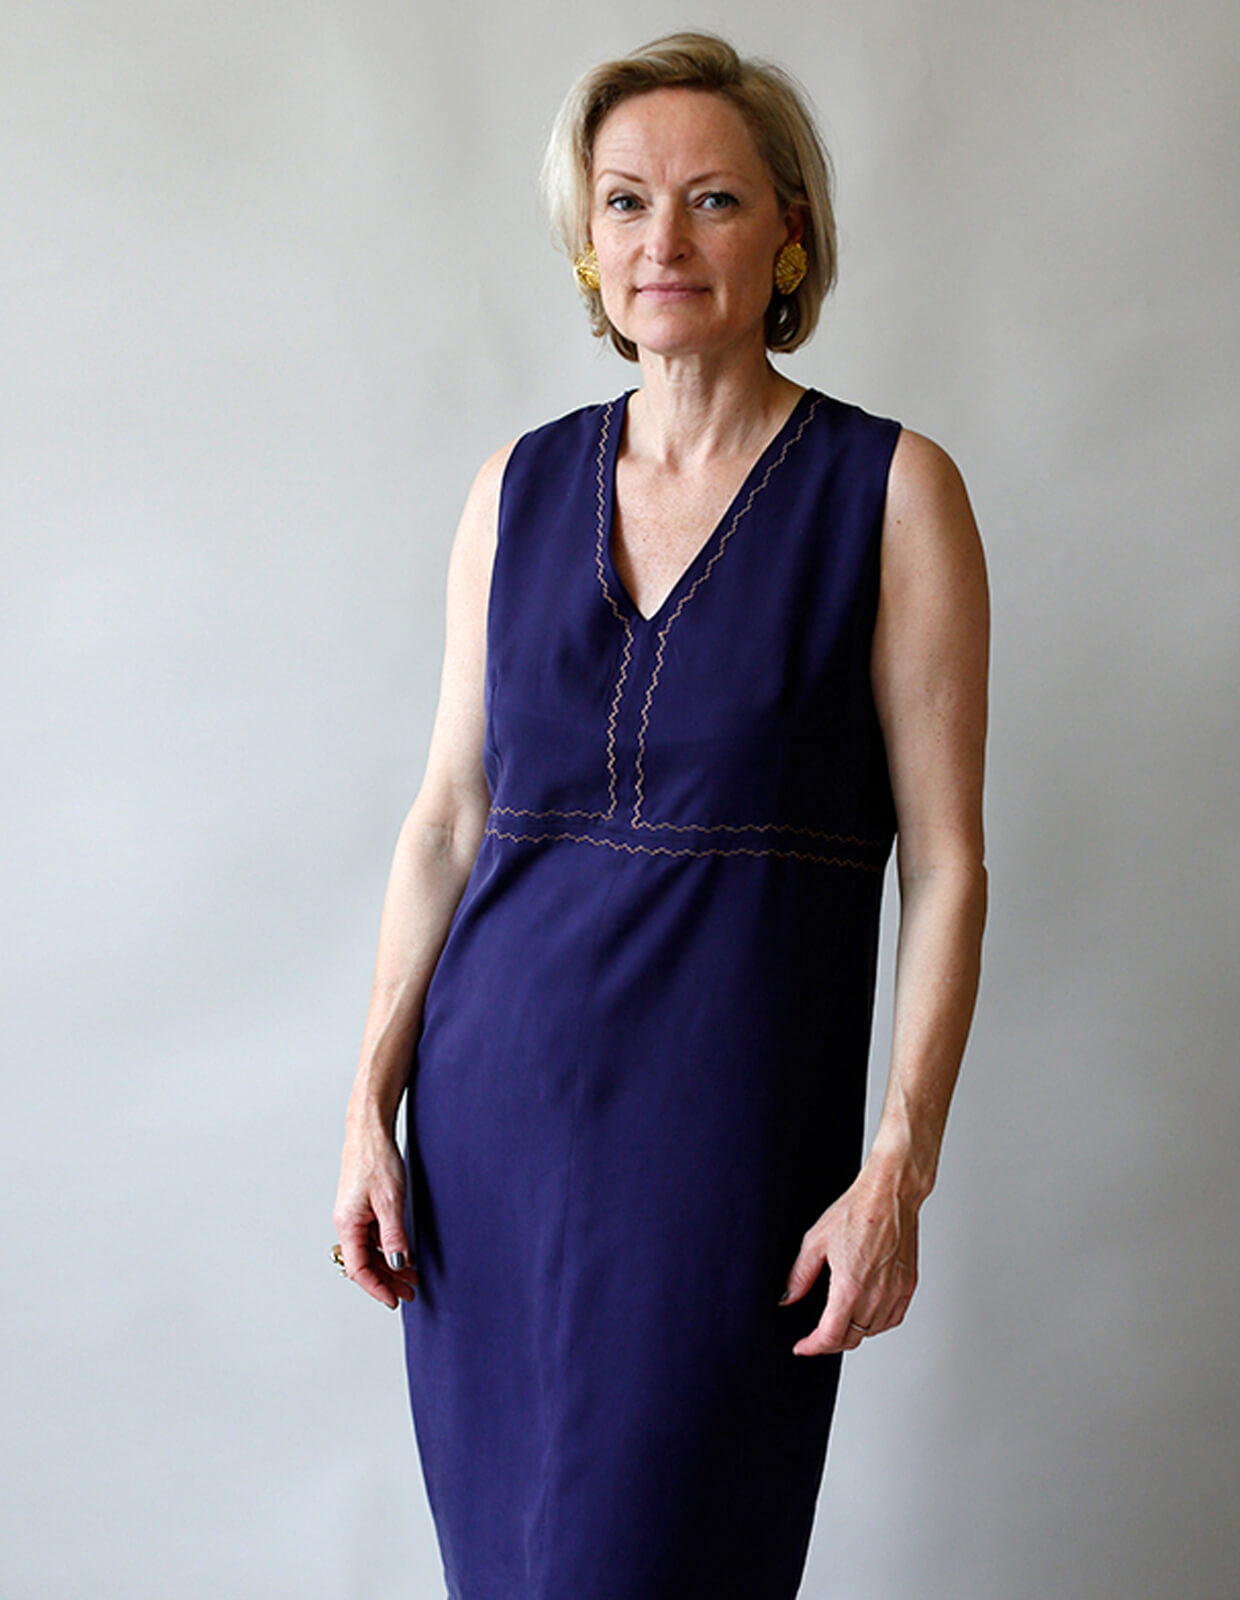 Woman wearing the Slip Dress sewing pattern from The Maker's Atelier on The Fold Line. A slip dress pattern made in tencel, viscose, silks, cottons, or linens fabrics, featuring a pull-on style, V-neck, sleeveless, vertical bust darts, and raised waist se